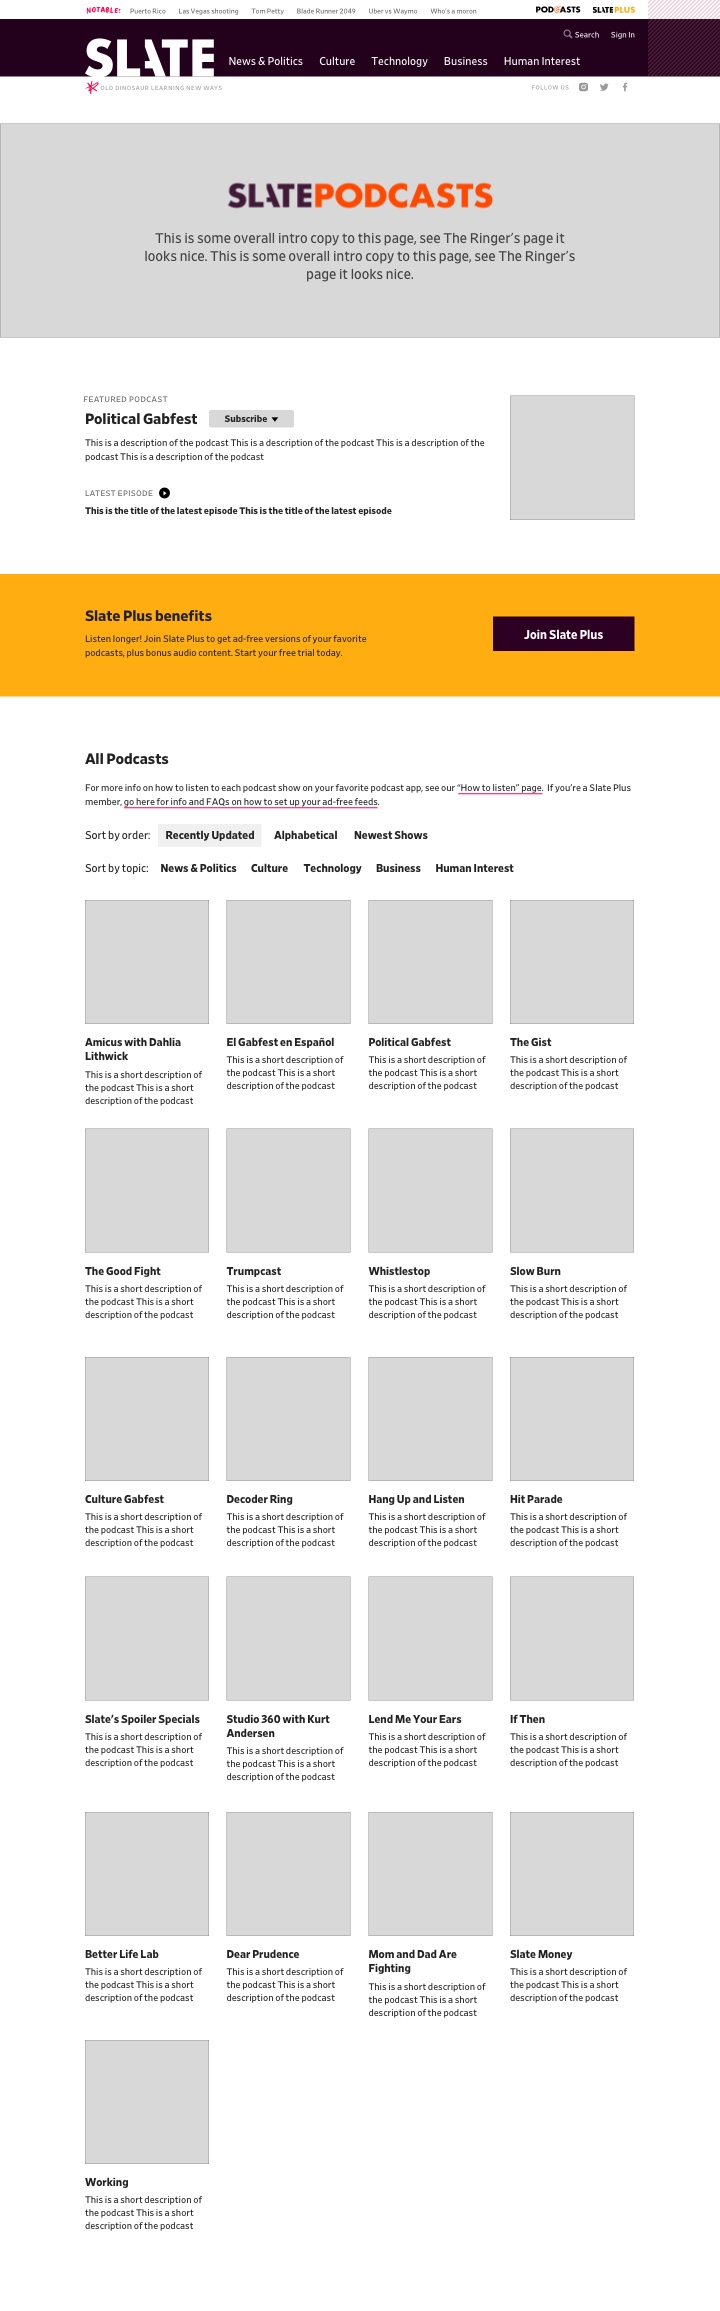 wireframe for landing page